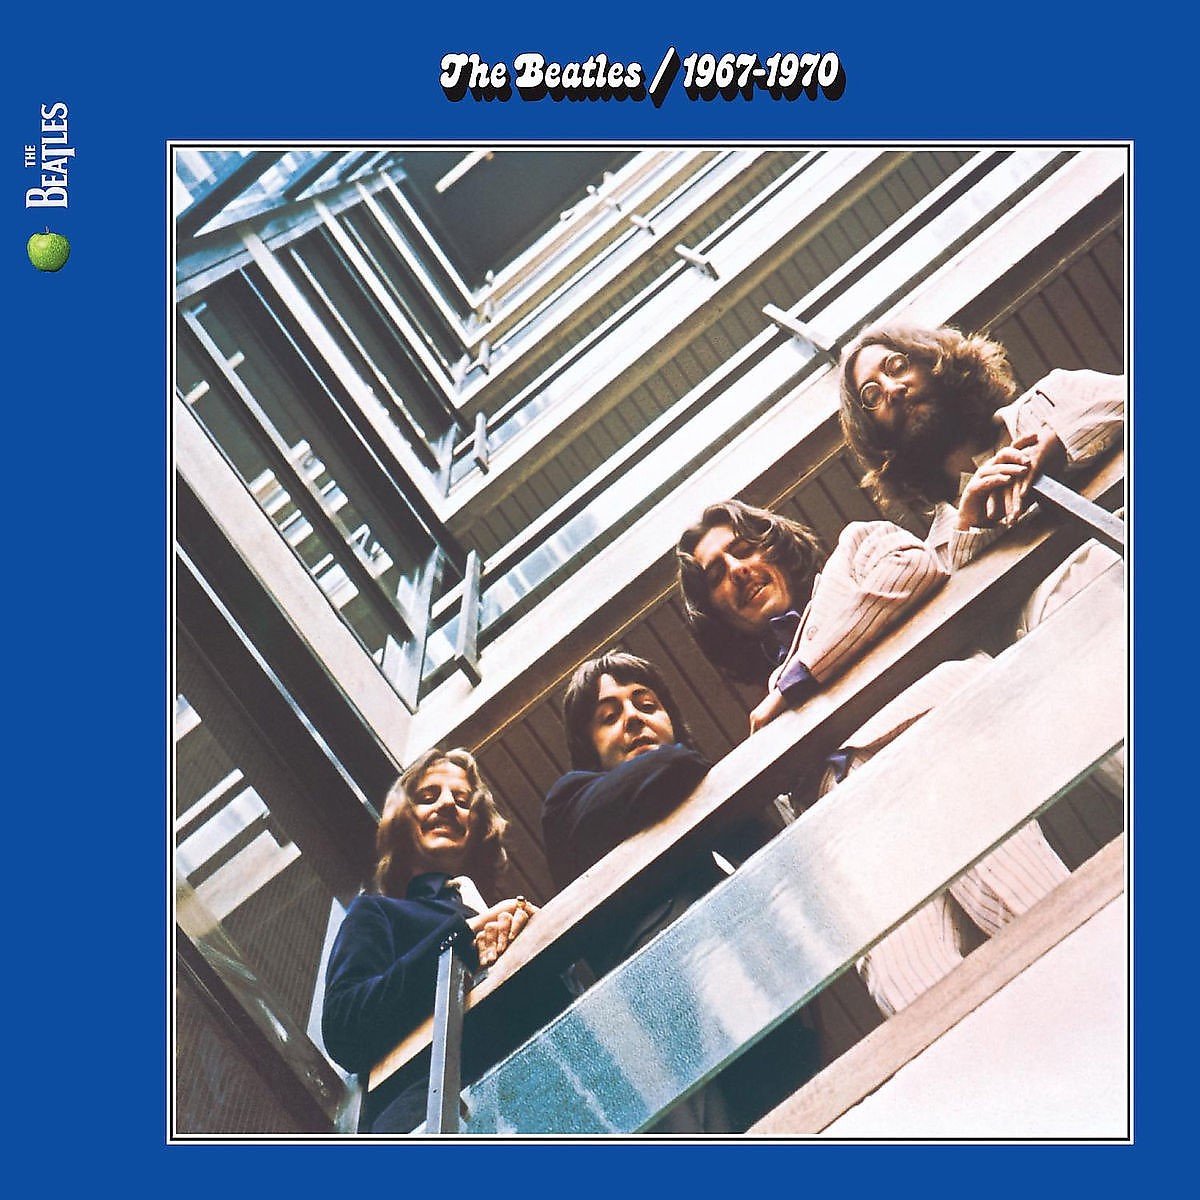 The Beatles - The Beatles 1967 - 1970 (2 CD) (Blue Edition) - The Beatles